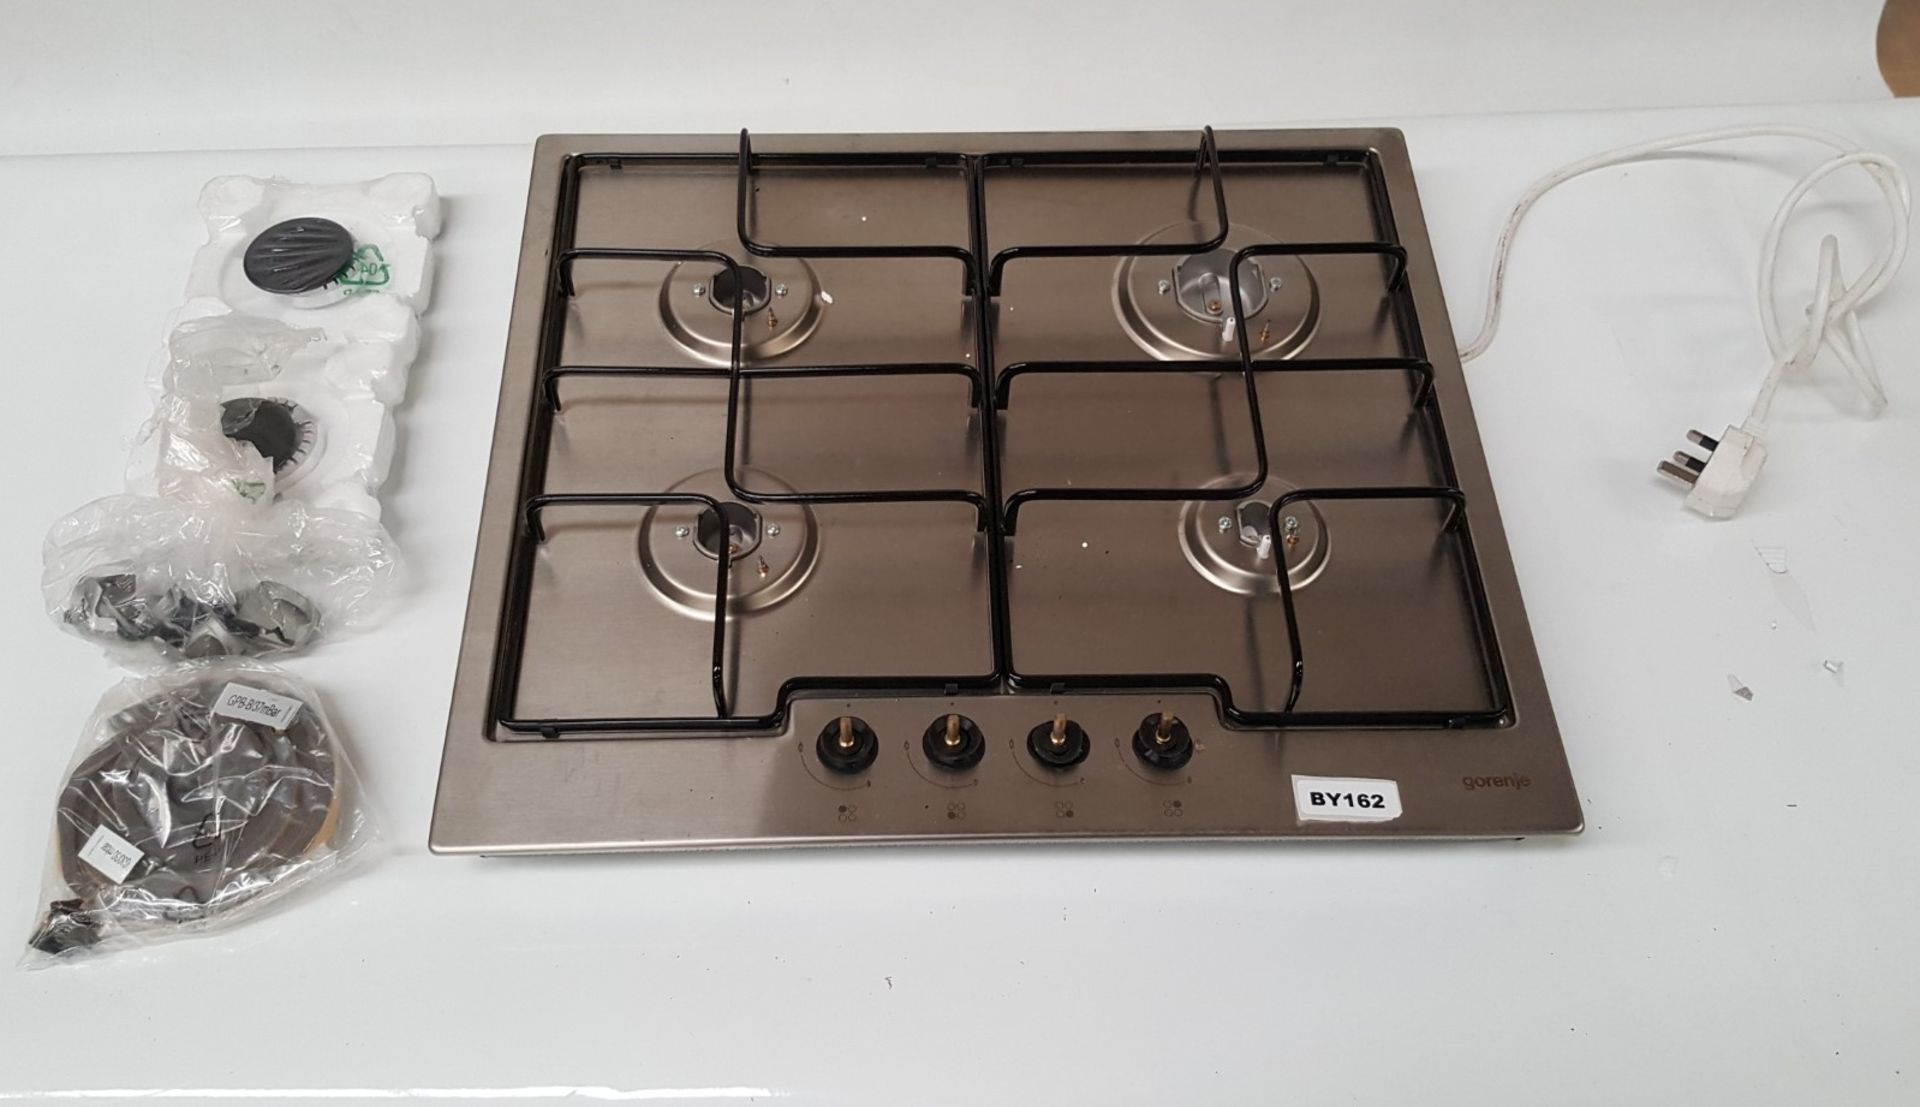 1 x Gorenje G6N4AX 60cm Gas Hob Stainless Steel - Ref BY162 - Image 2 of 5